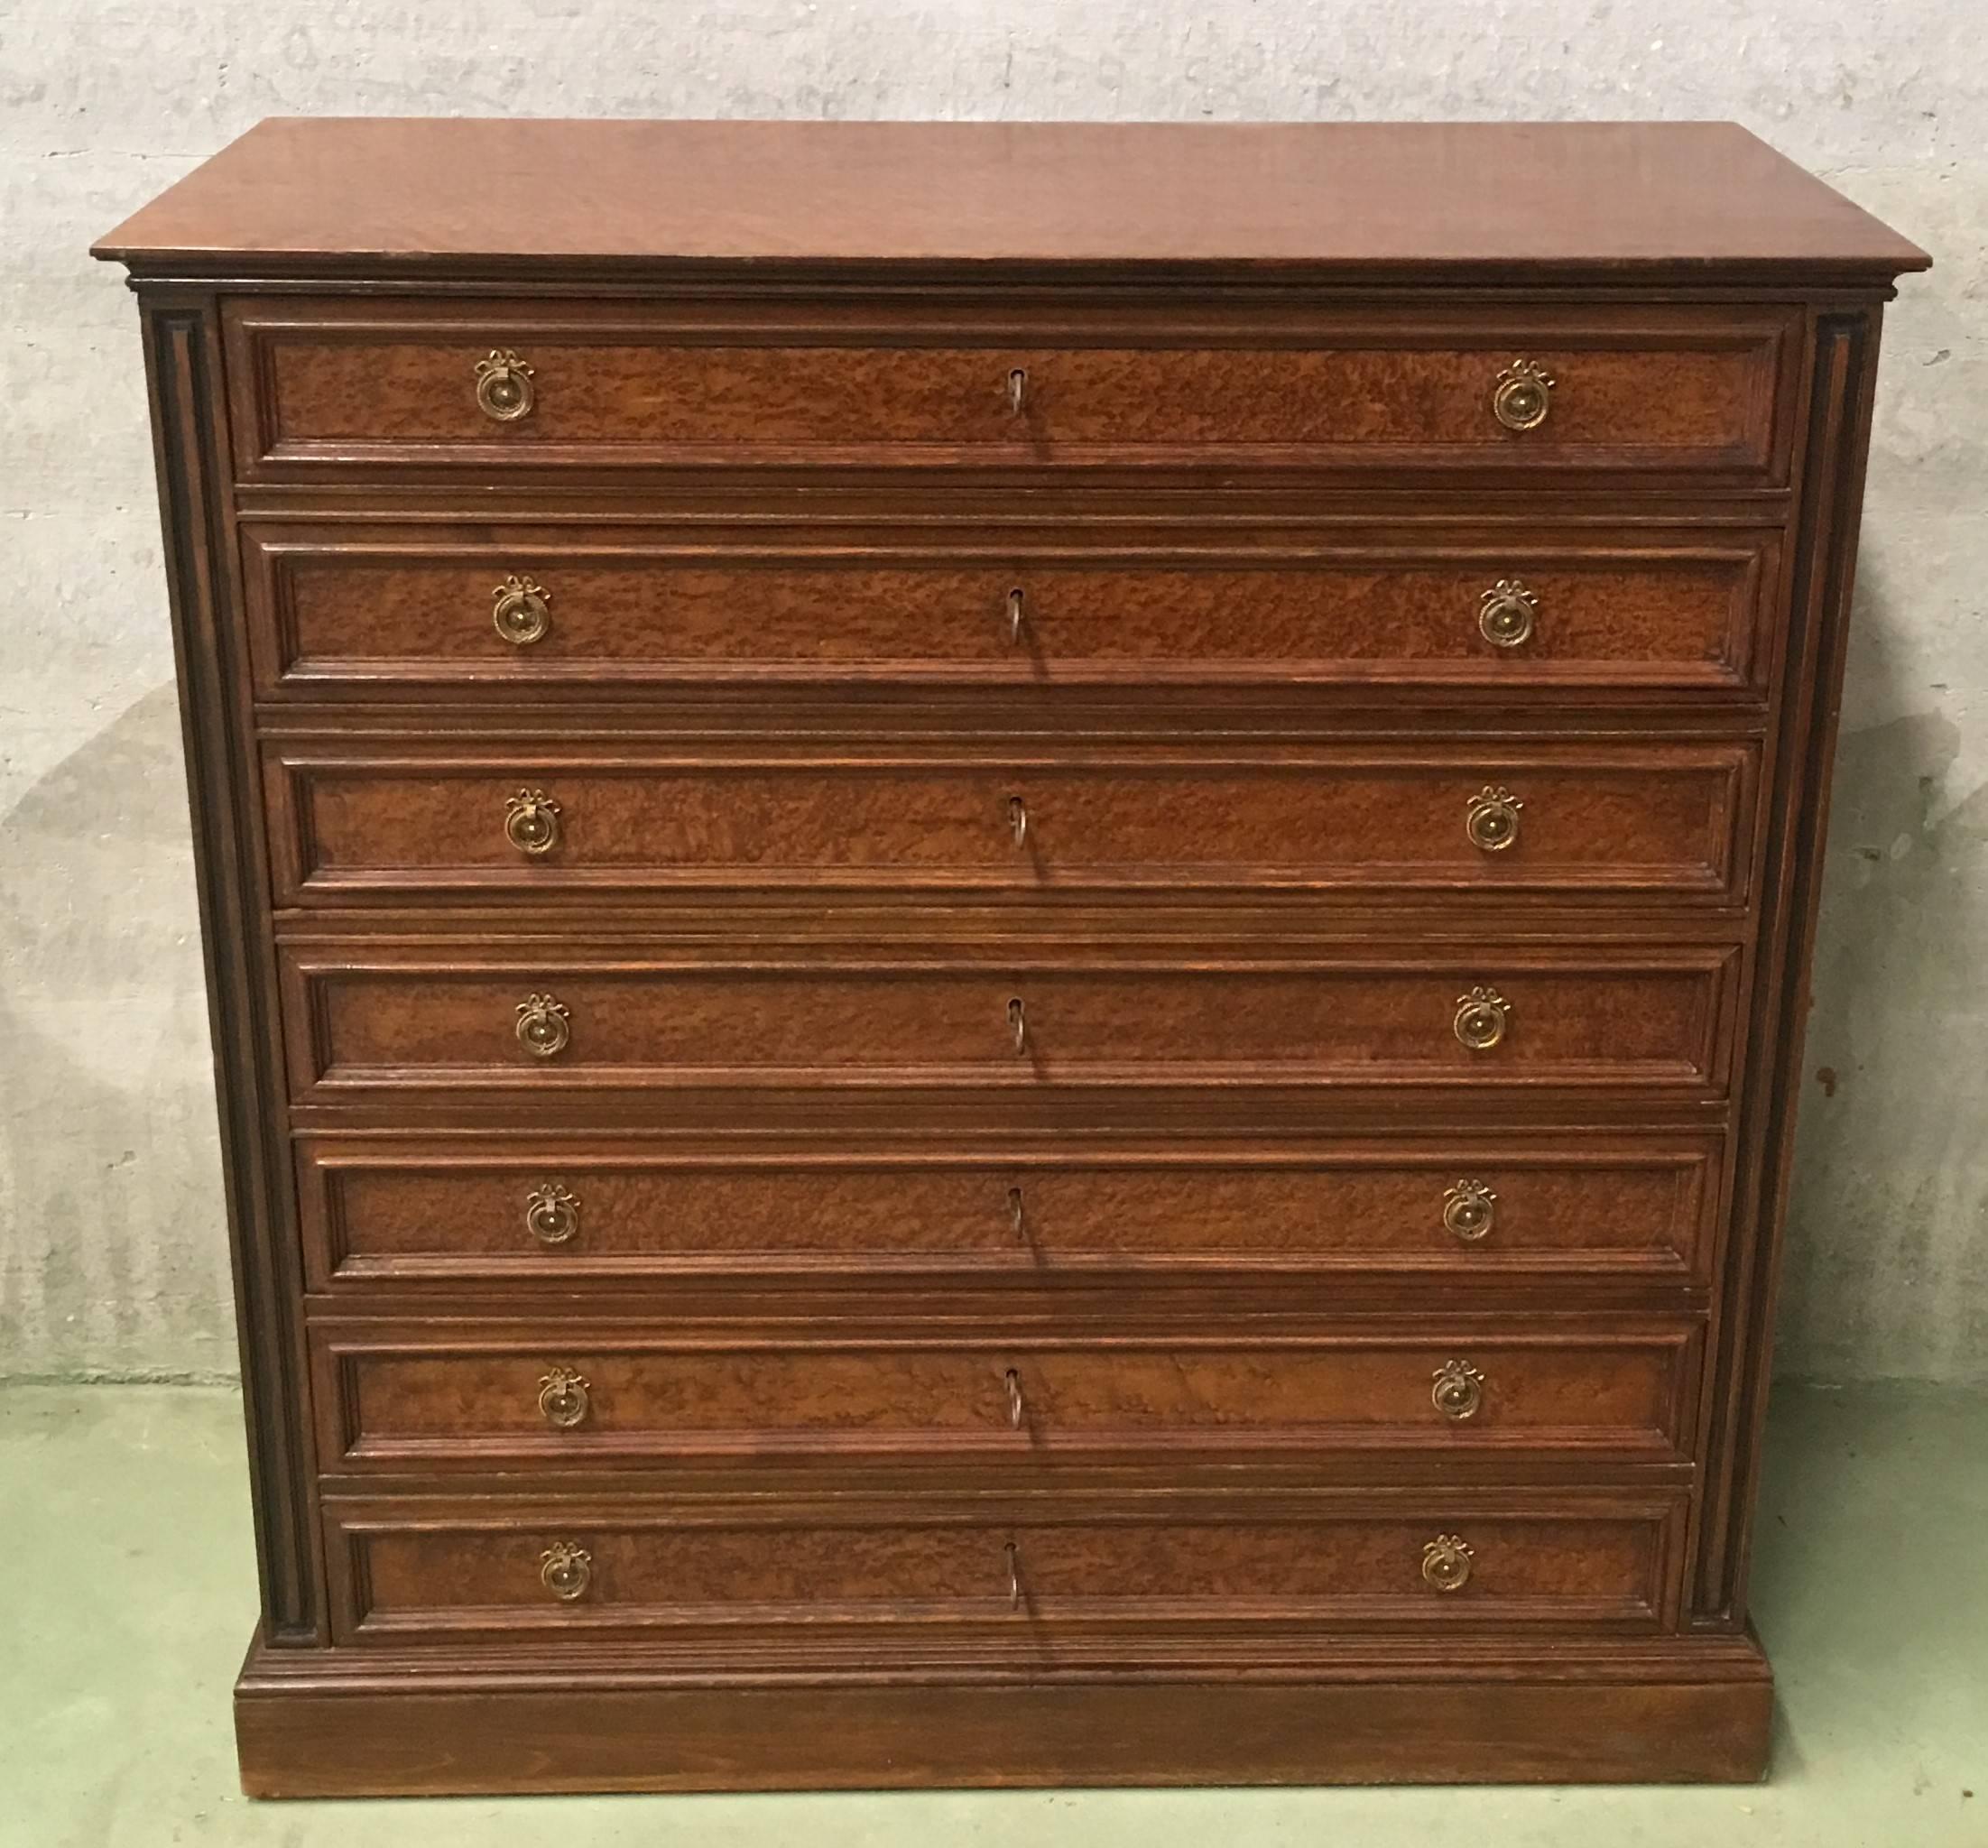 Seven-drawered French chest of drawers or Semainiere, dresser. The chest shows fluted three-quarter columns on the corners and a beautiful walnut.